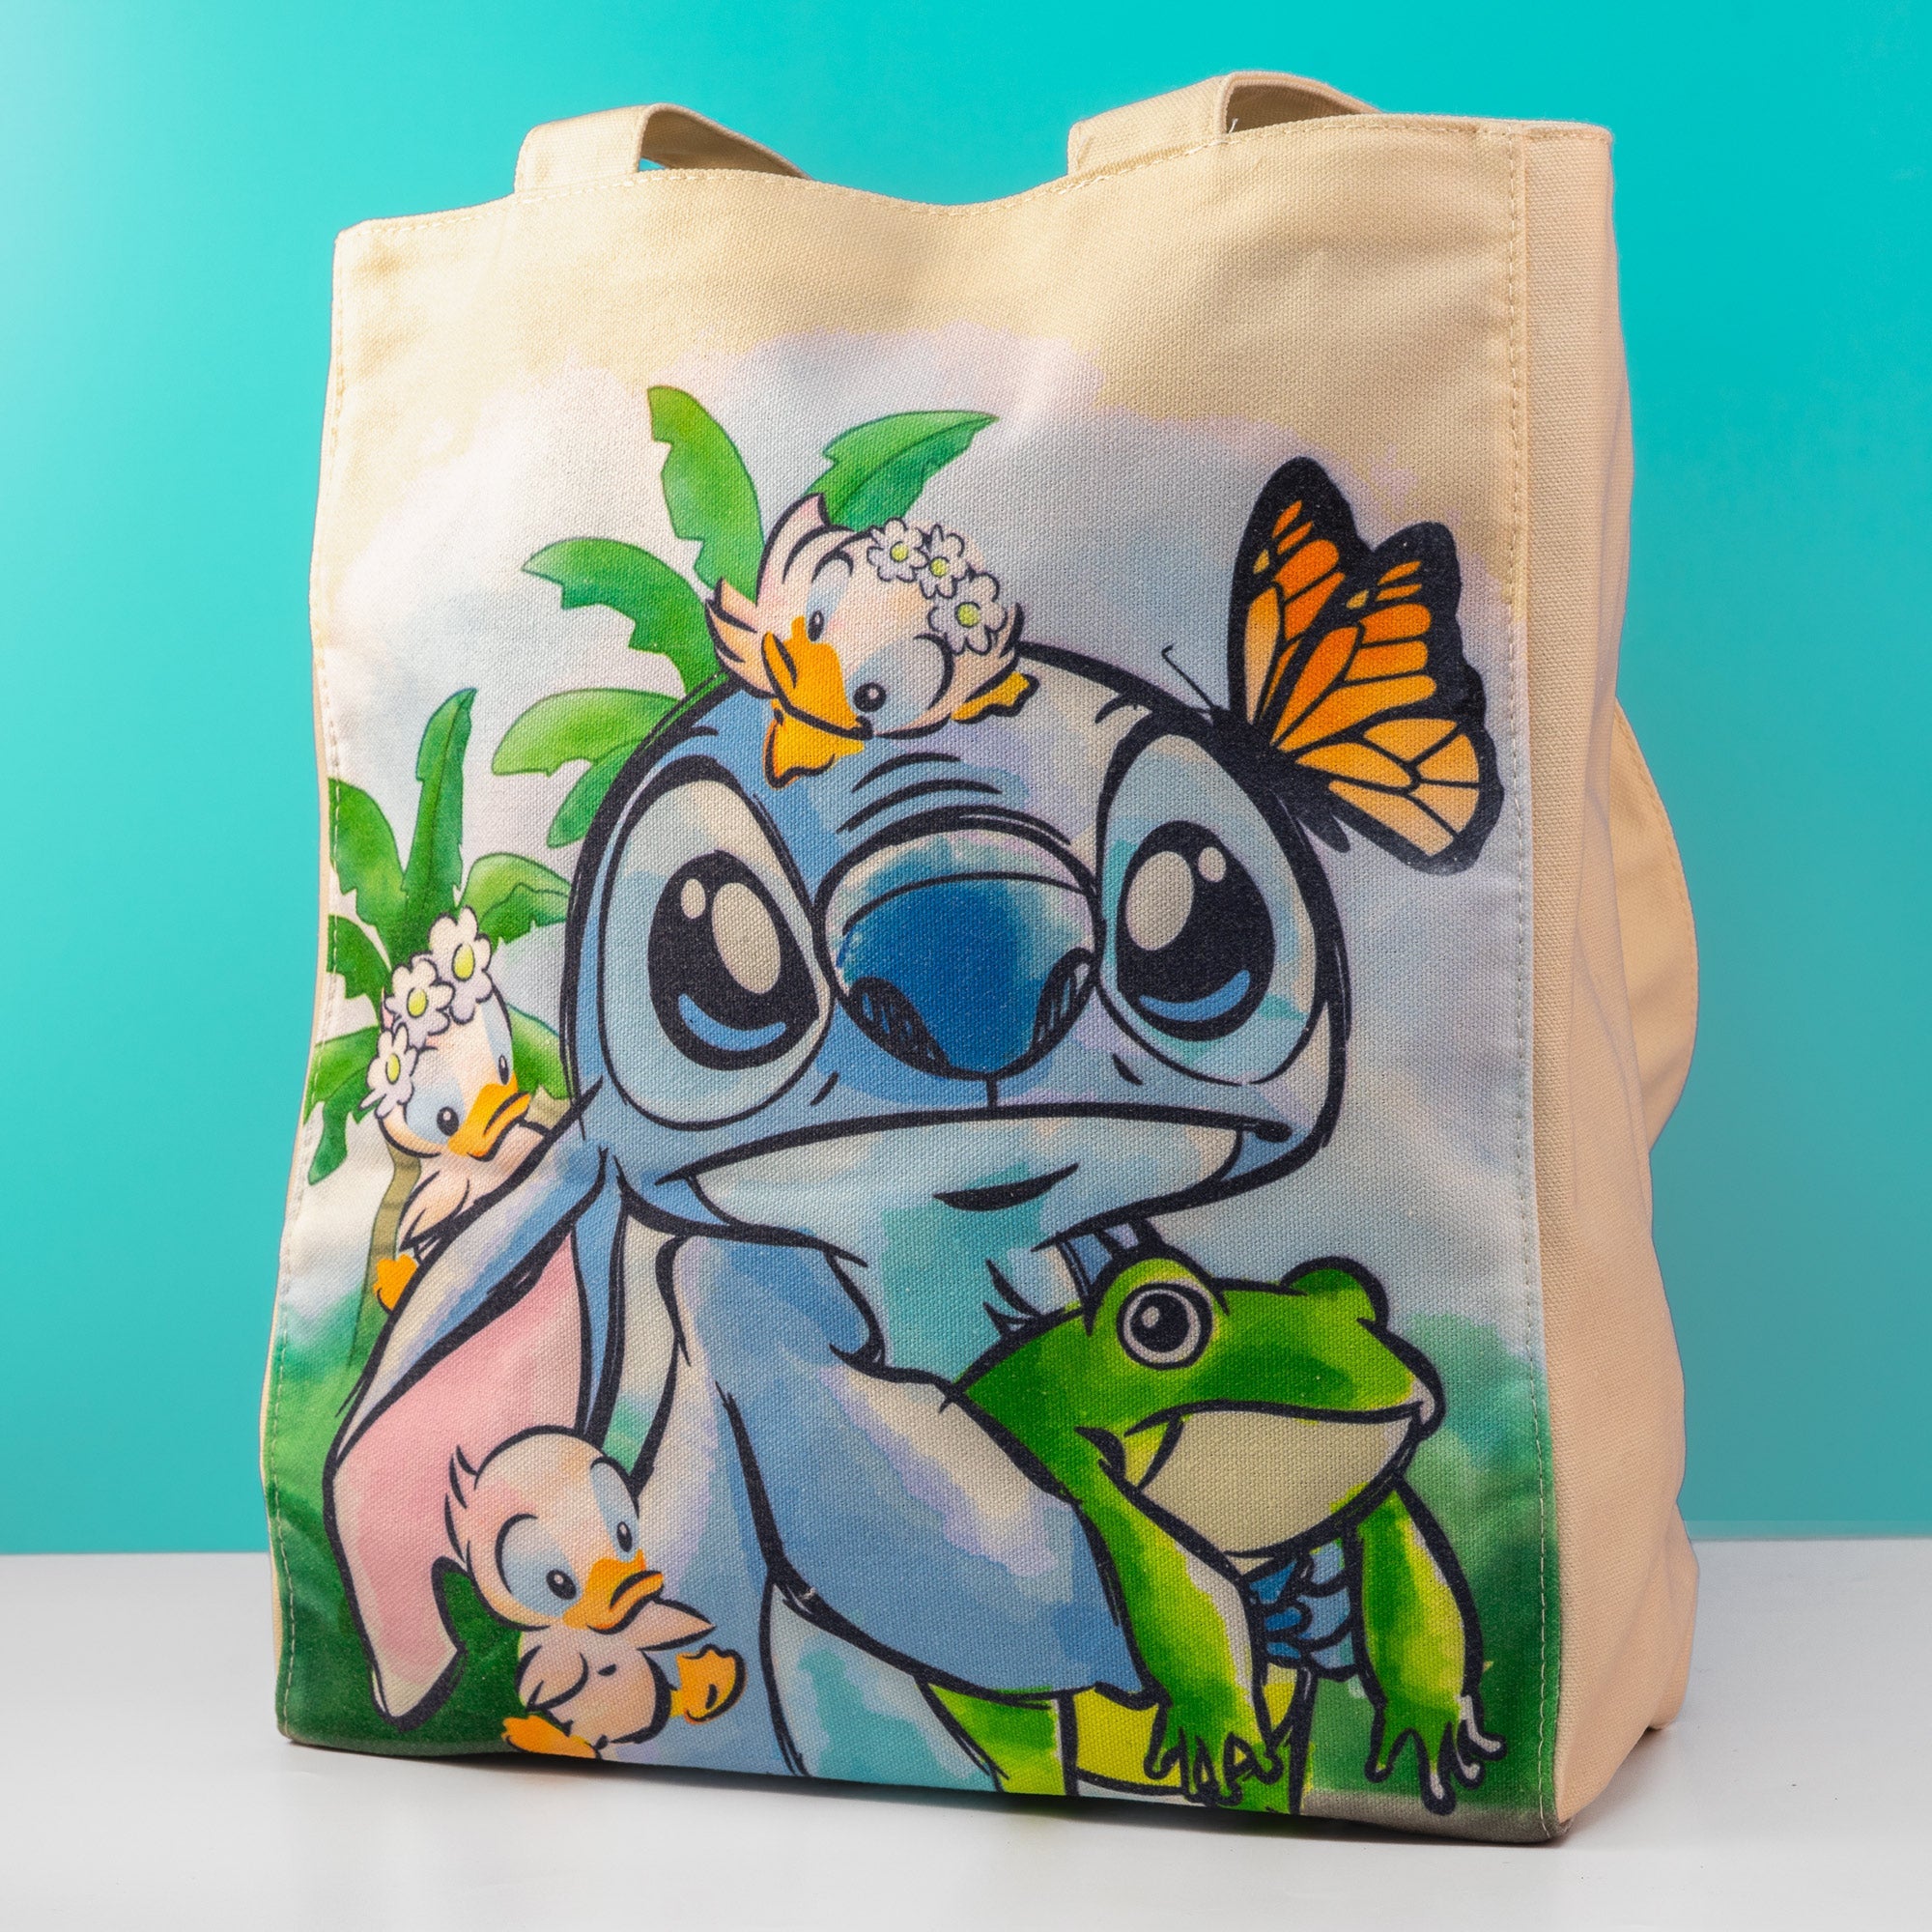 Loungefly x Disney Lilo and Stitch Springtime Canvas Tote Bag - GeekCore